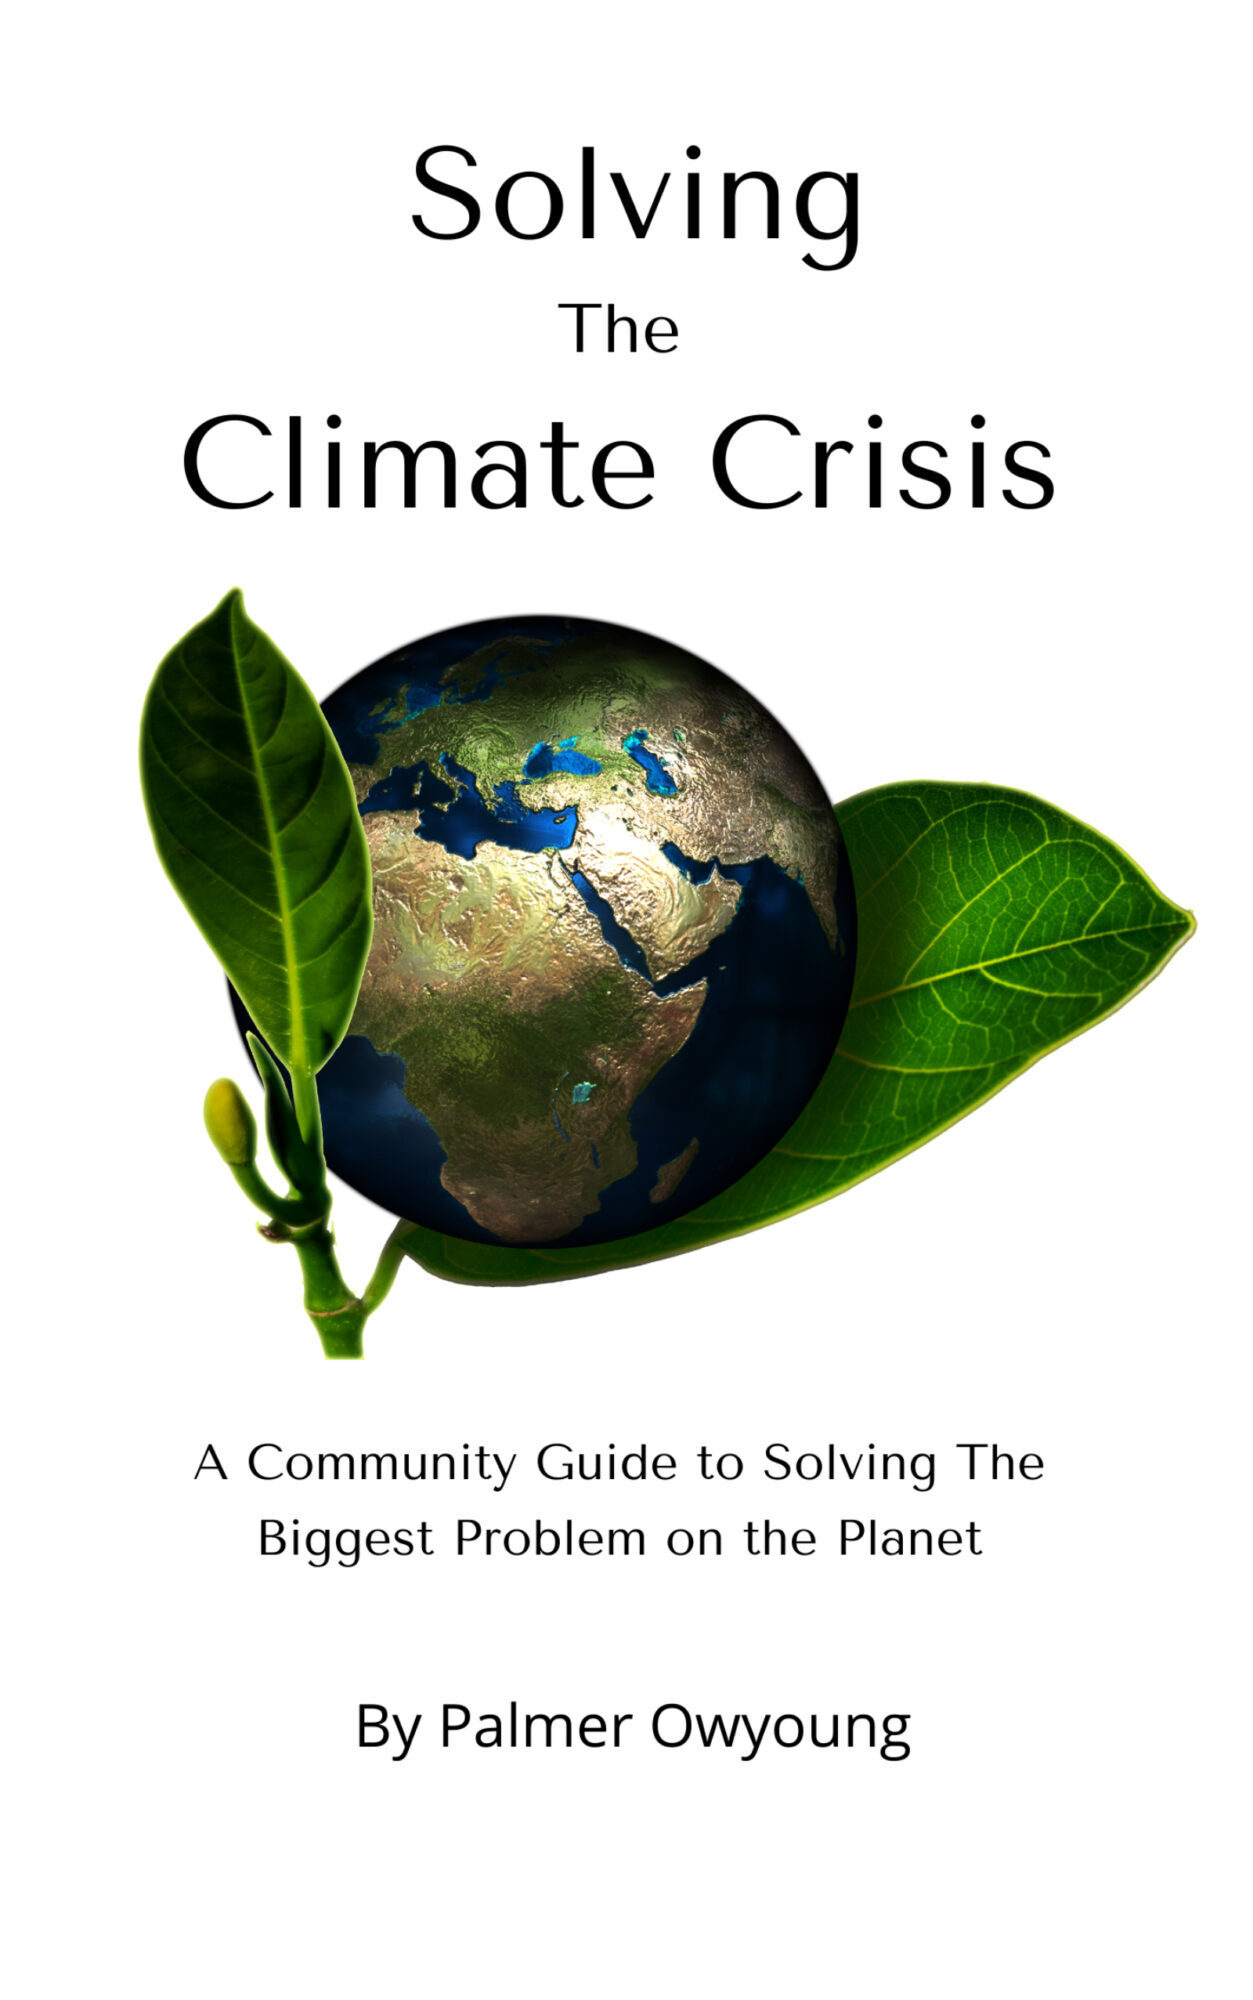 Solving the Climate Crisis Book Cover the Planet Earth Wrapped in a Leaf